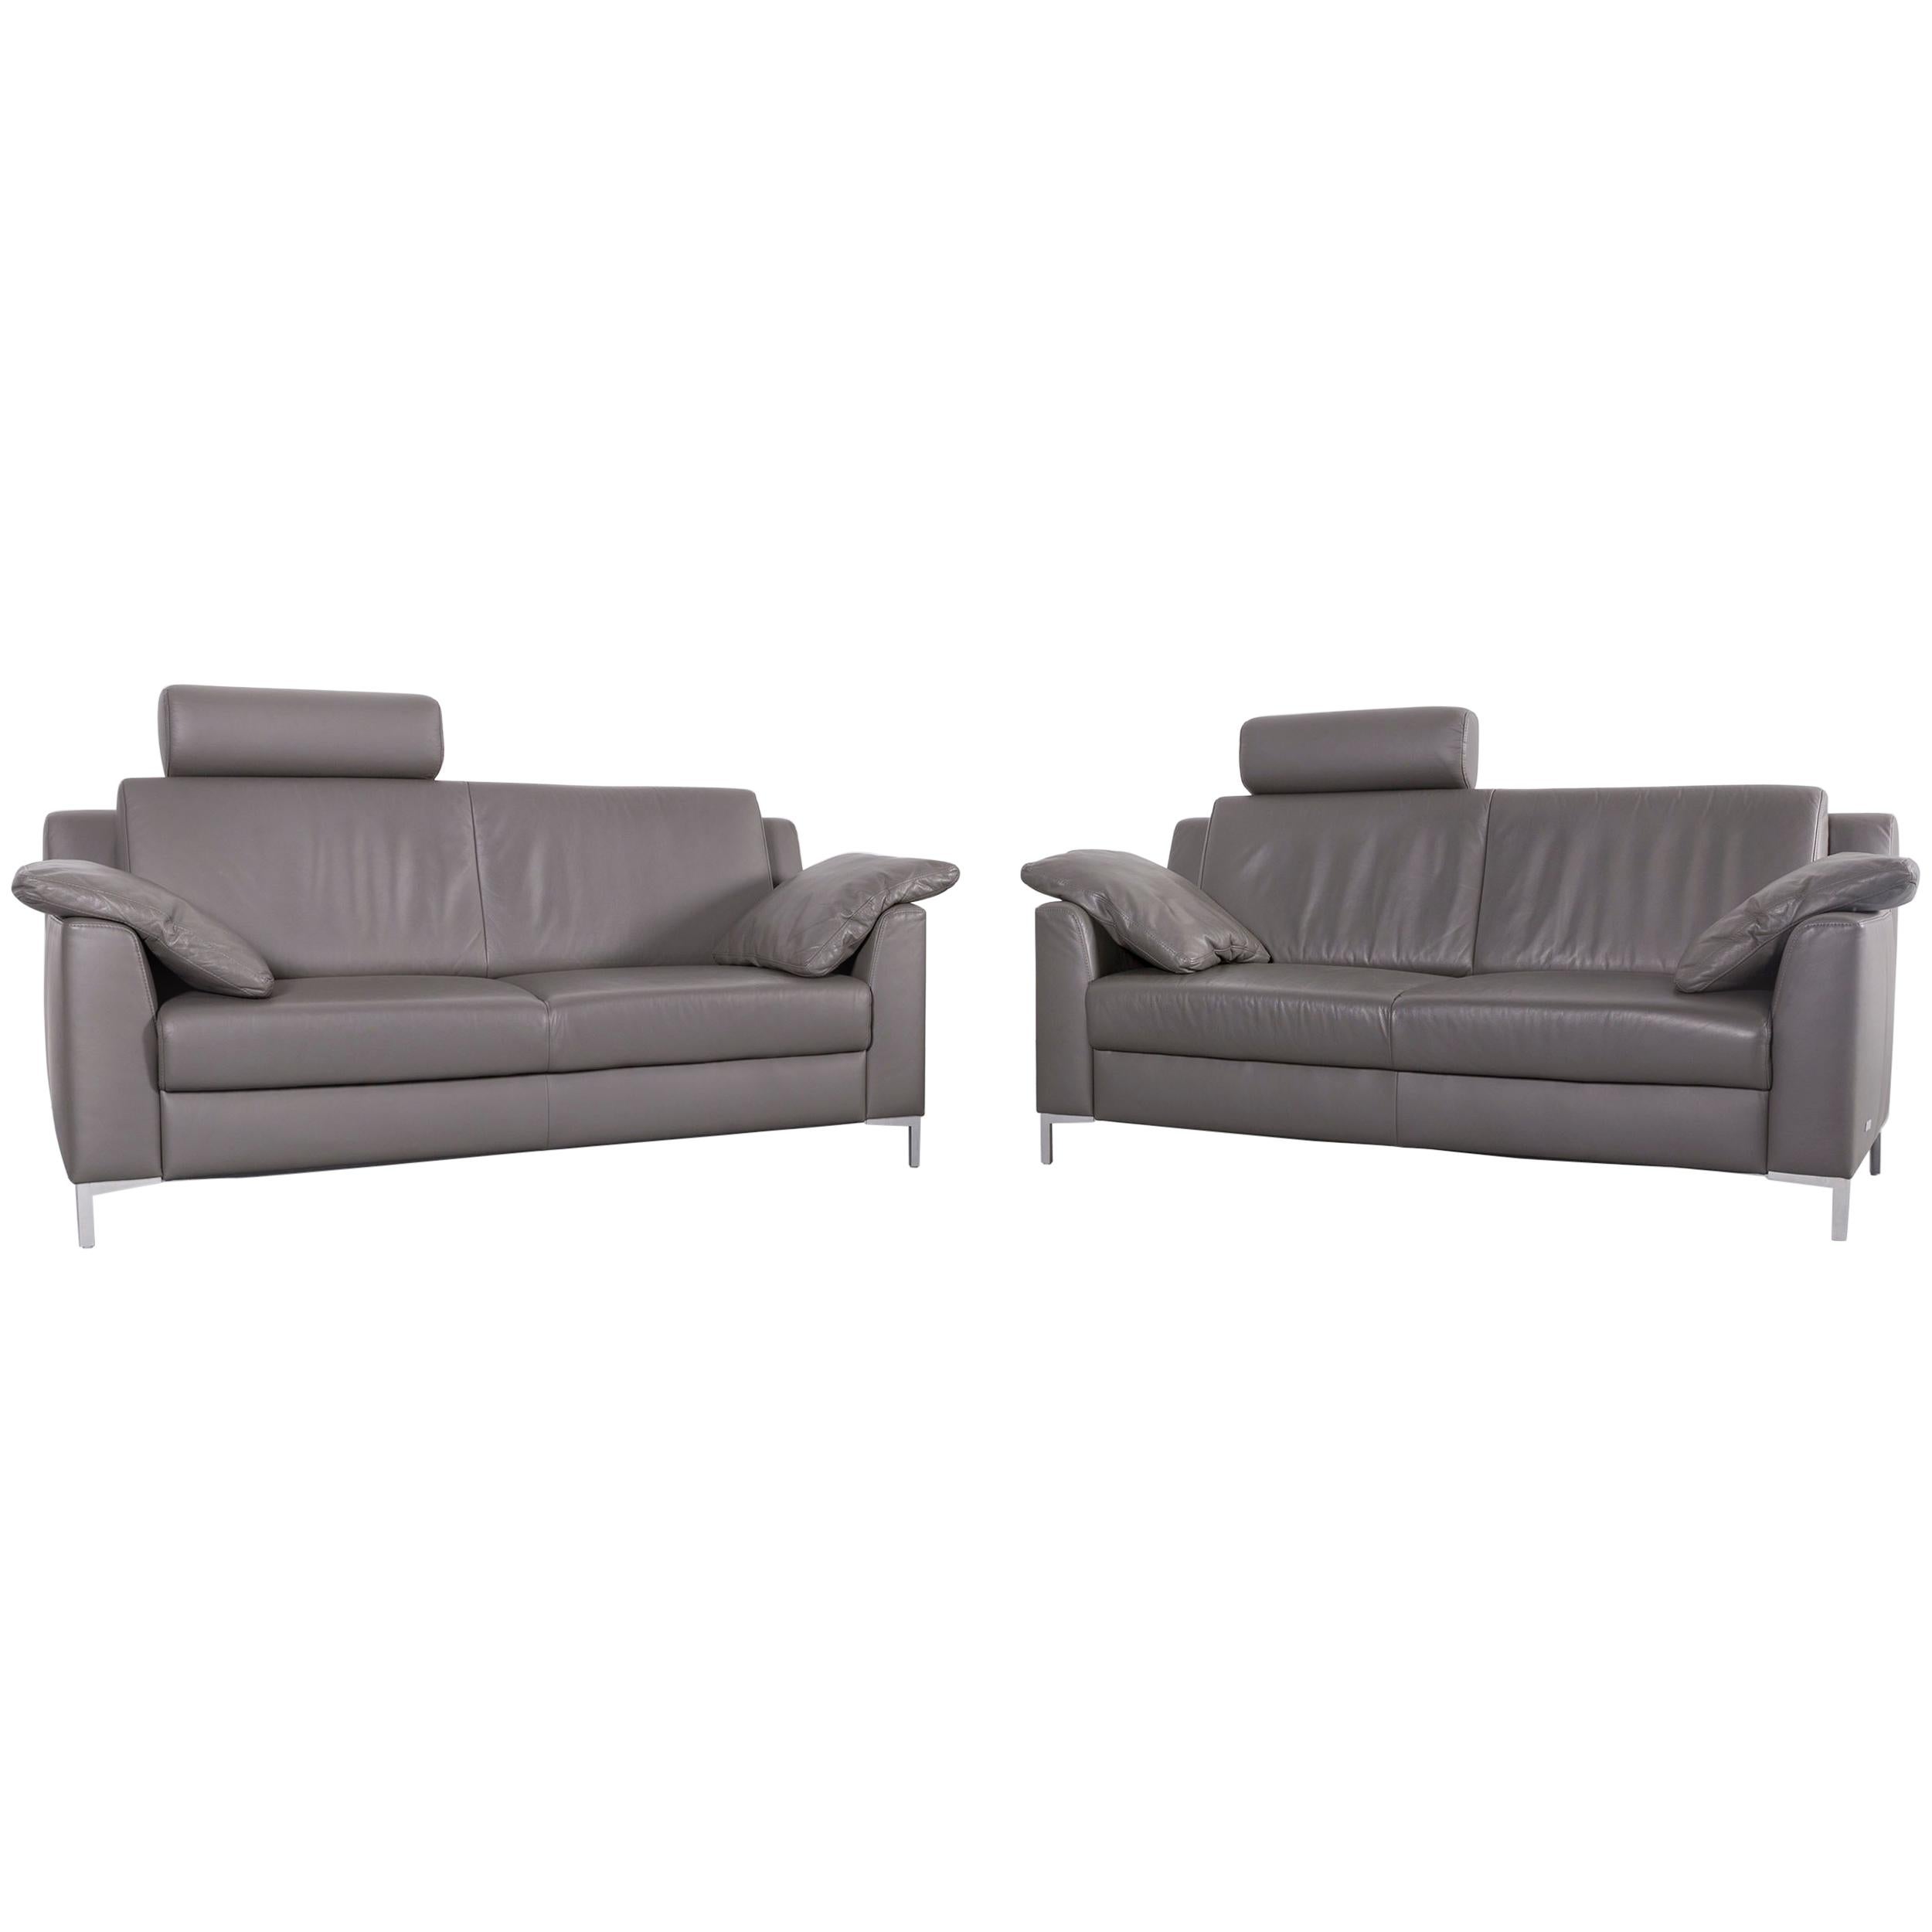 Mondo Leather Sofa Set Grey Leather Two-Seat Couch